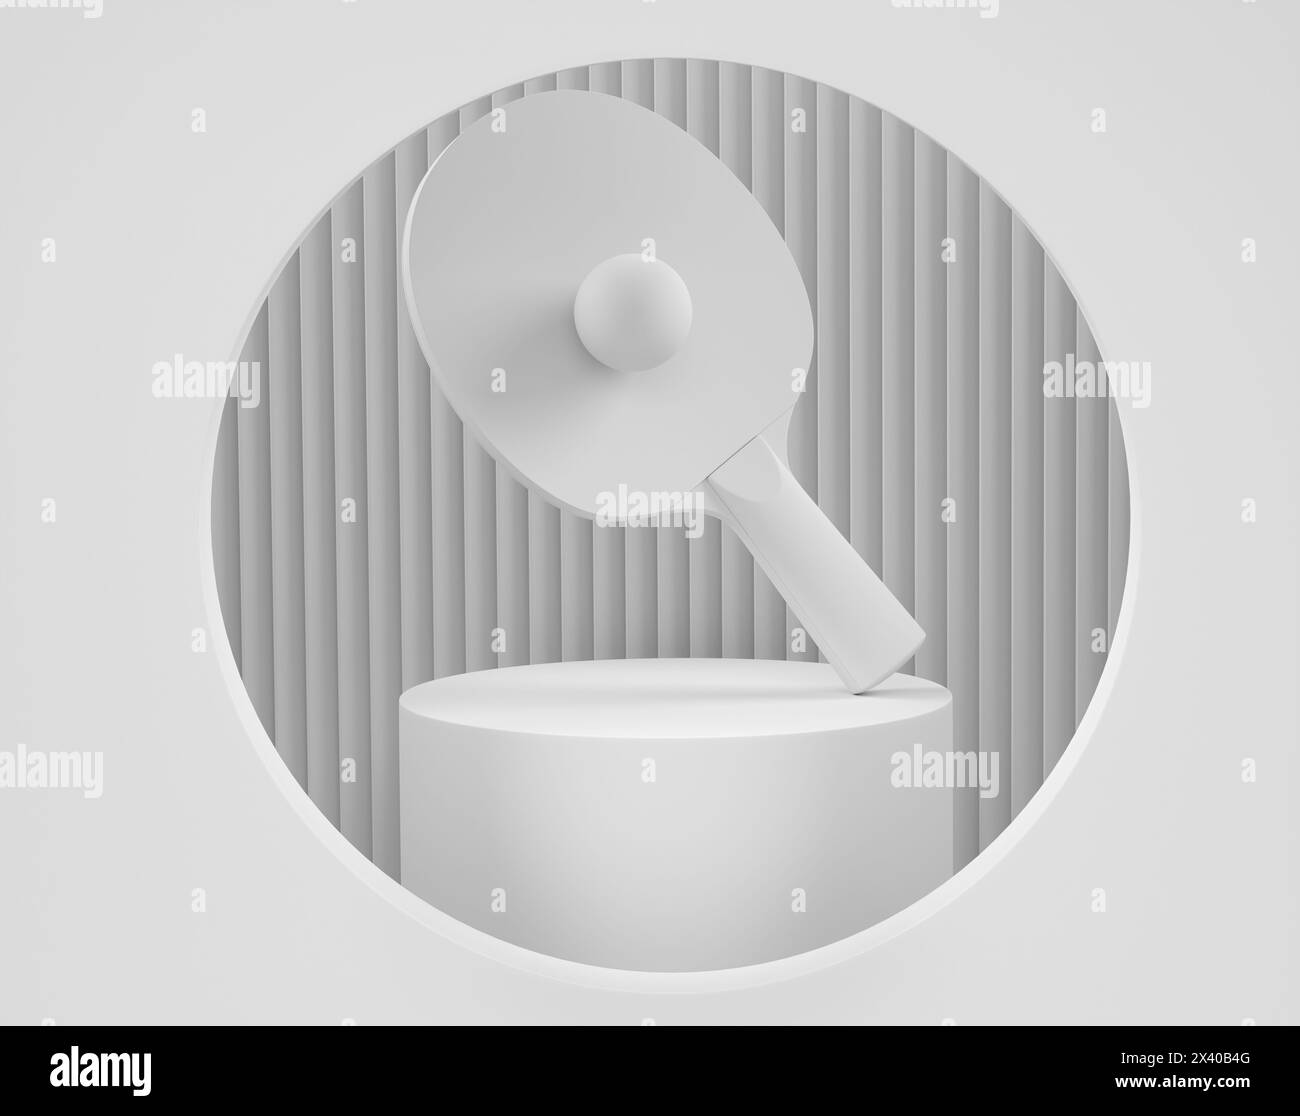 Ping pong racket for table tennis with ball on cylinder podium with steps on monochrome background. 3d render of display product like sport accessorie Stock Photo